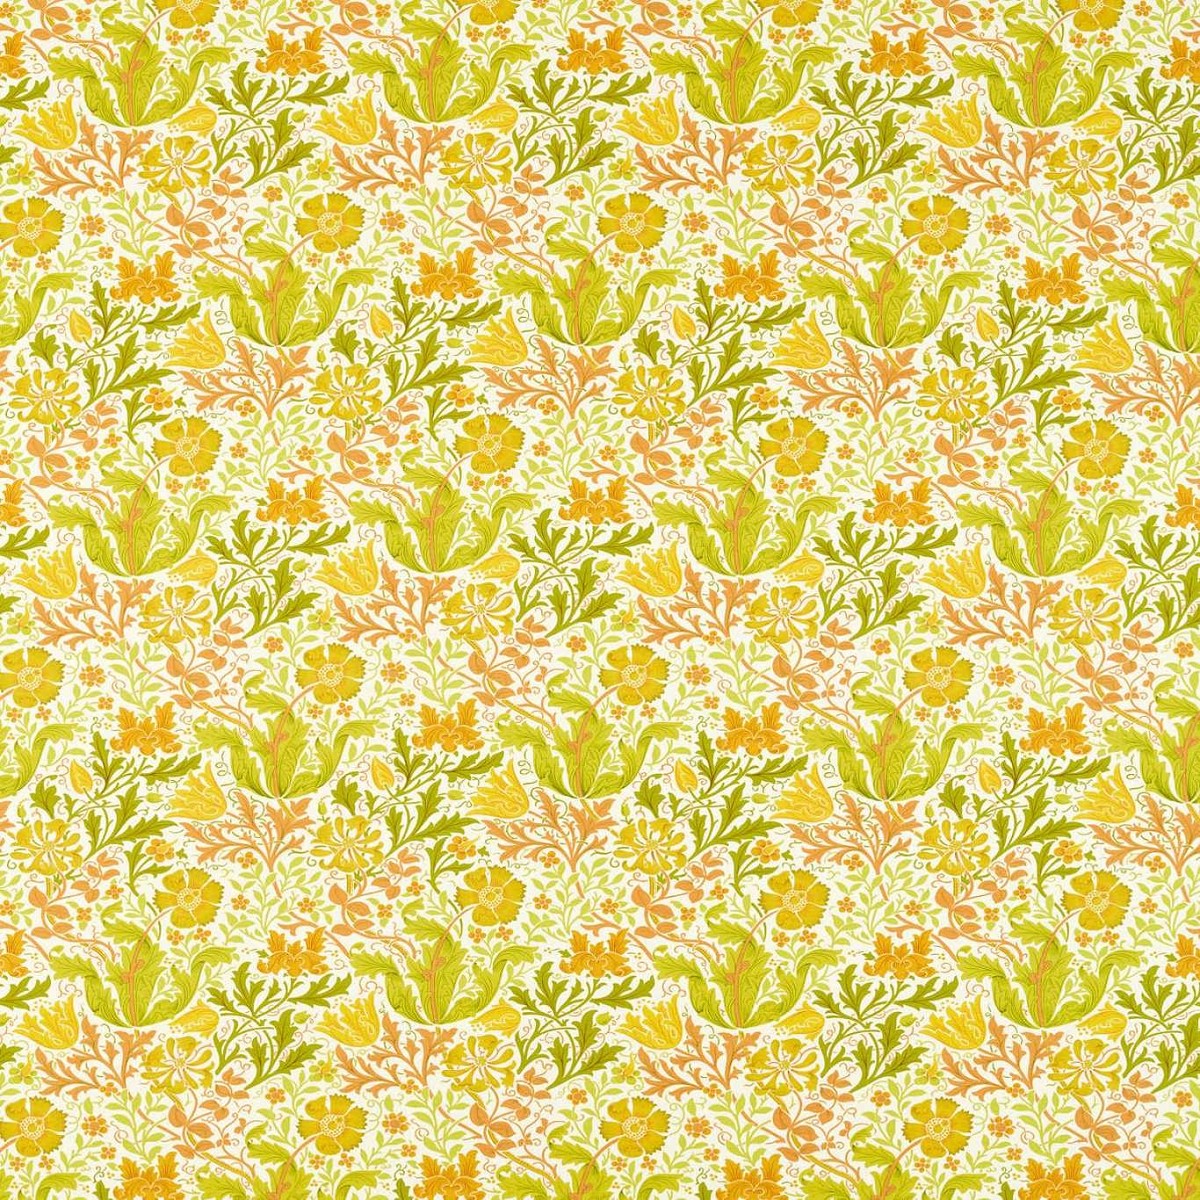 Compton Summer Yellow Fabric by William Morris & Co.